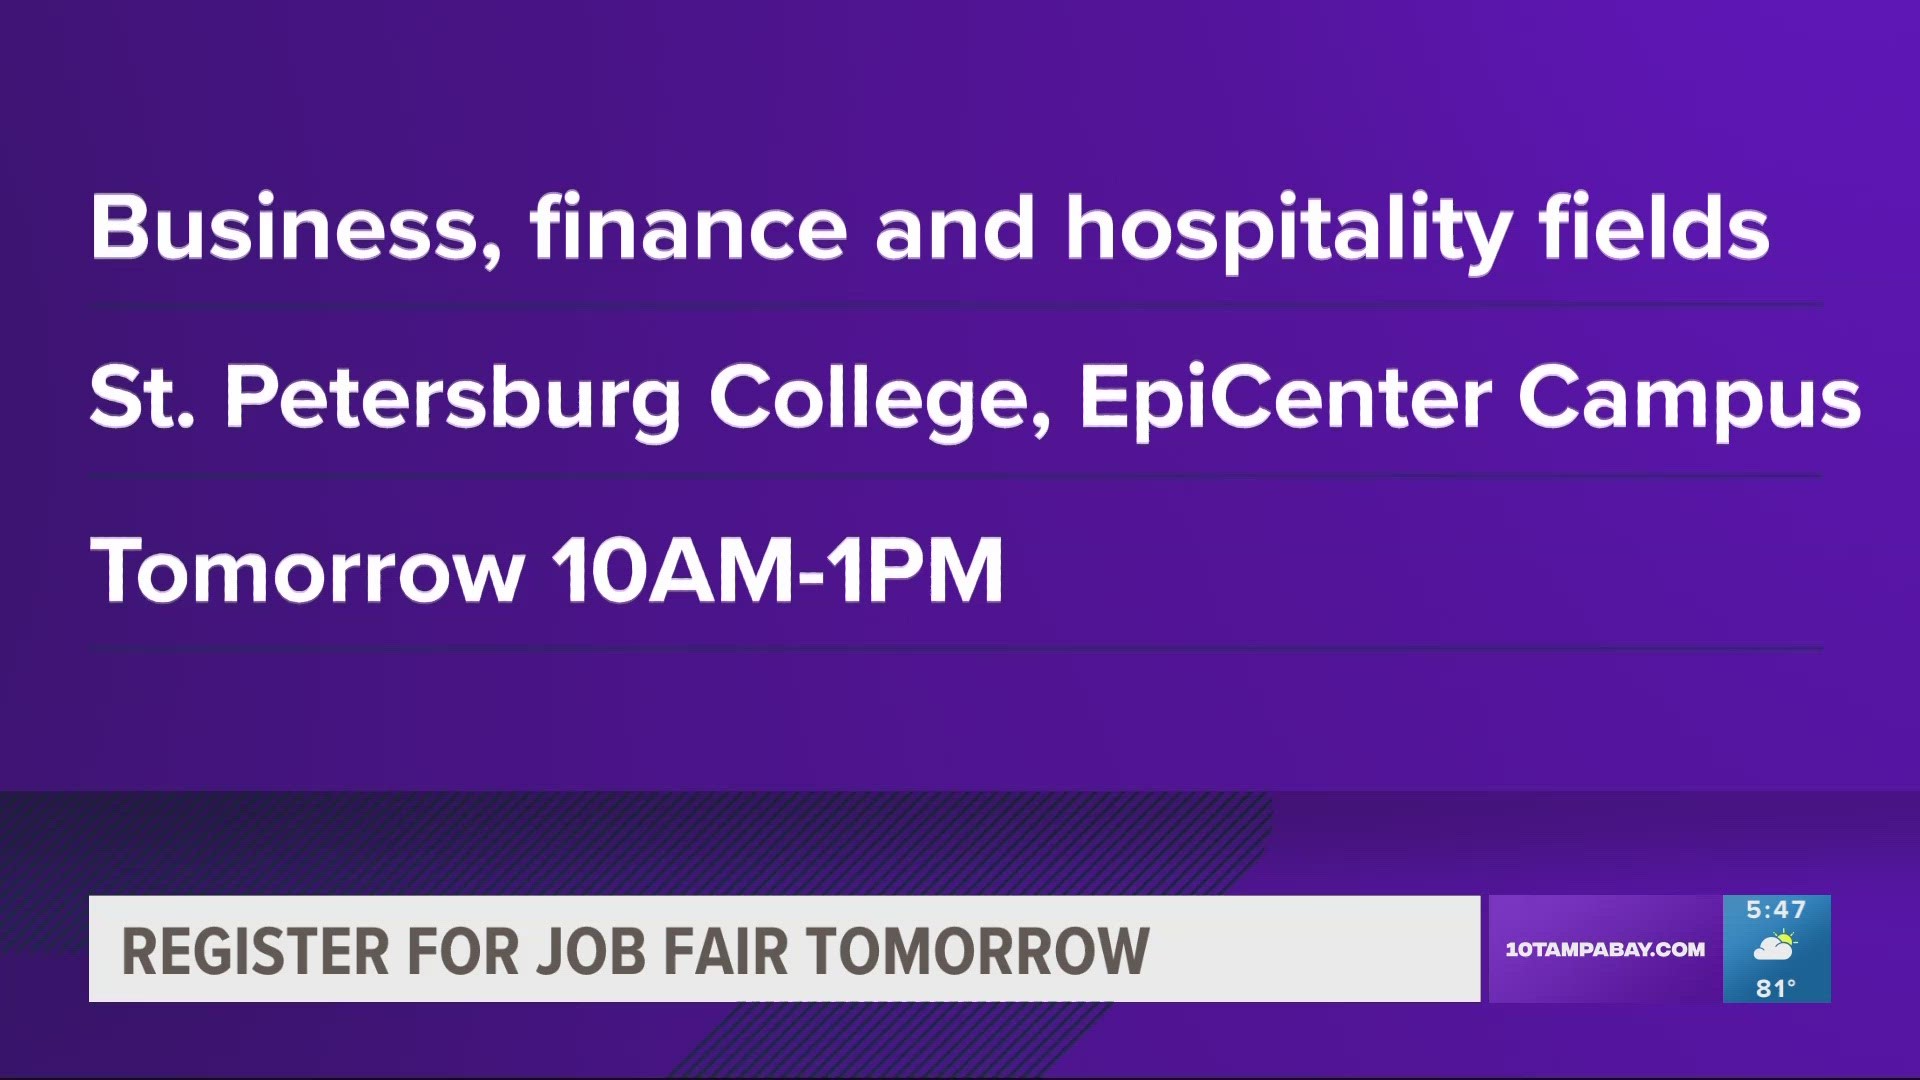 The career fair is geared toward people seeking jobs in the business, finance and hospitality fields.